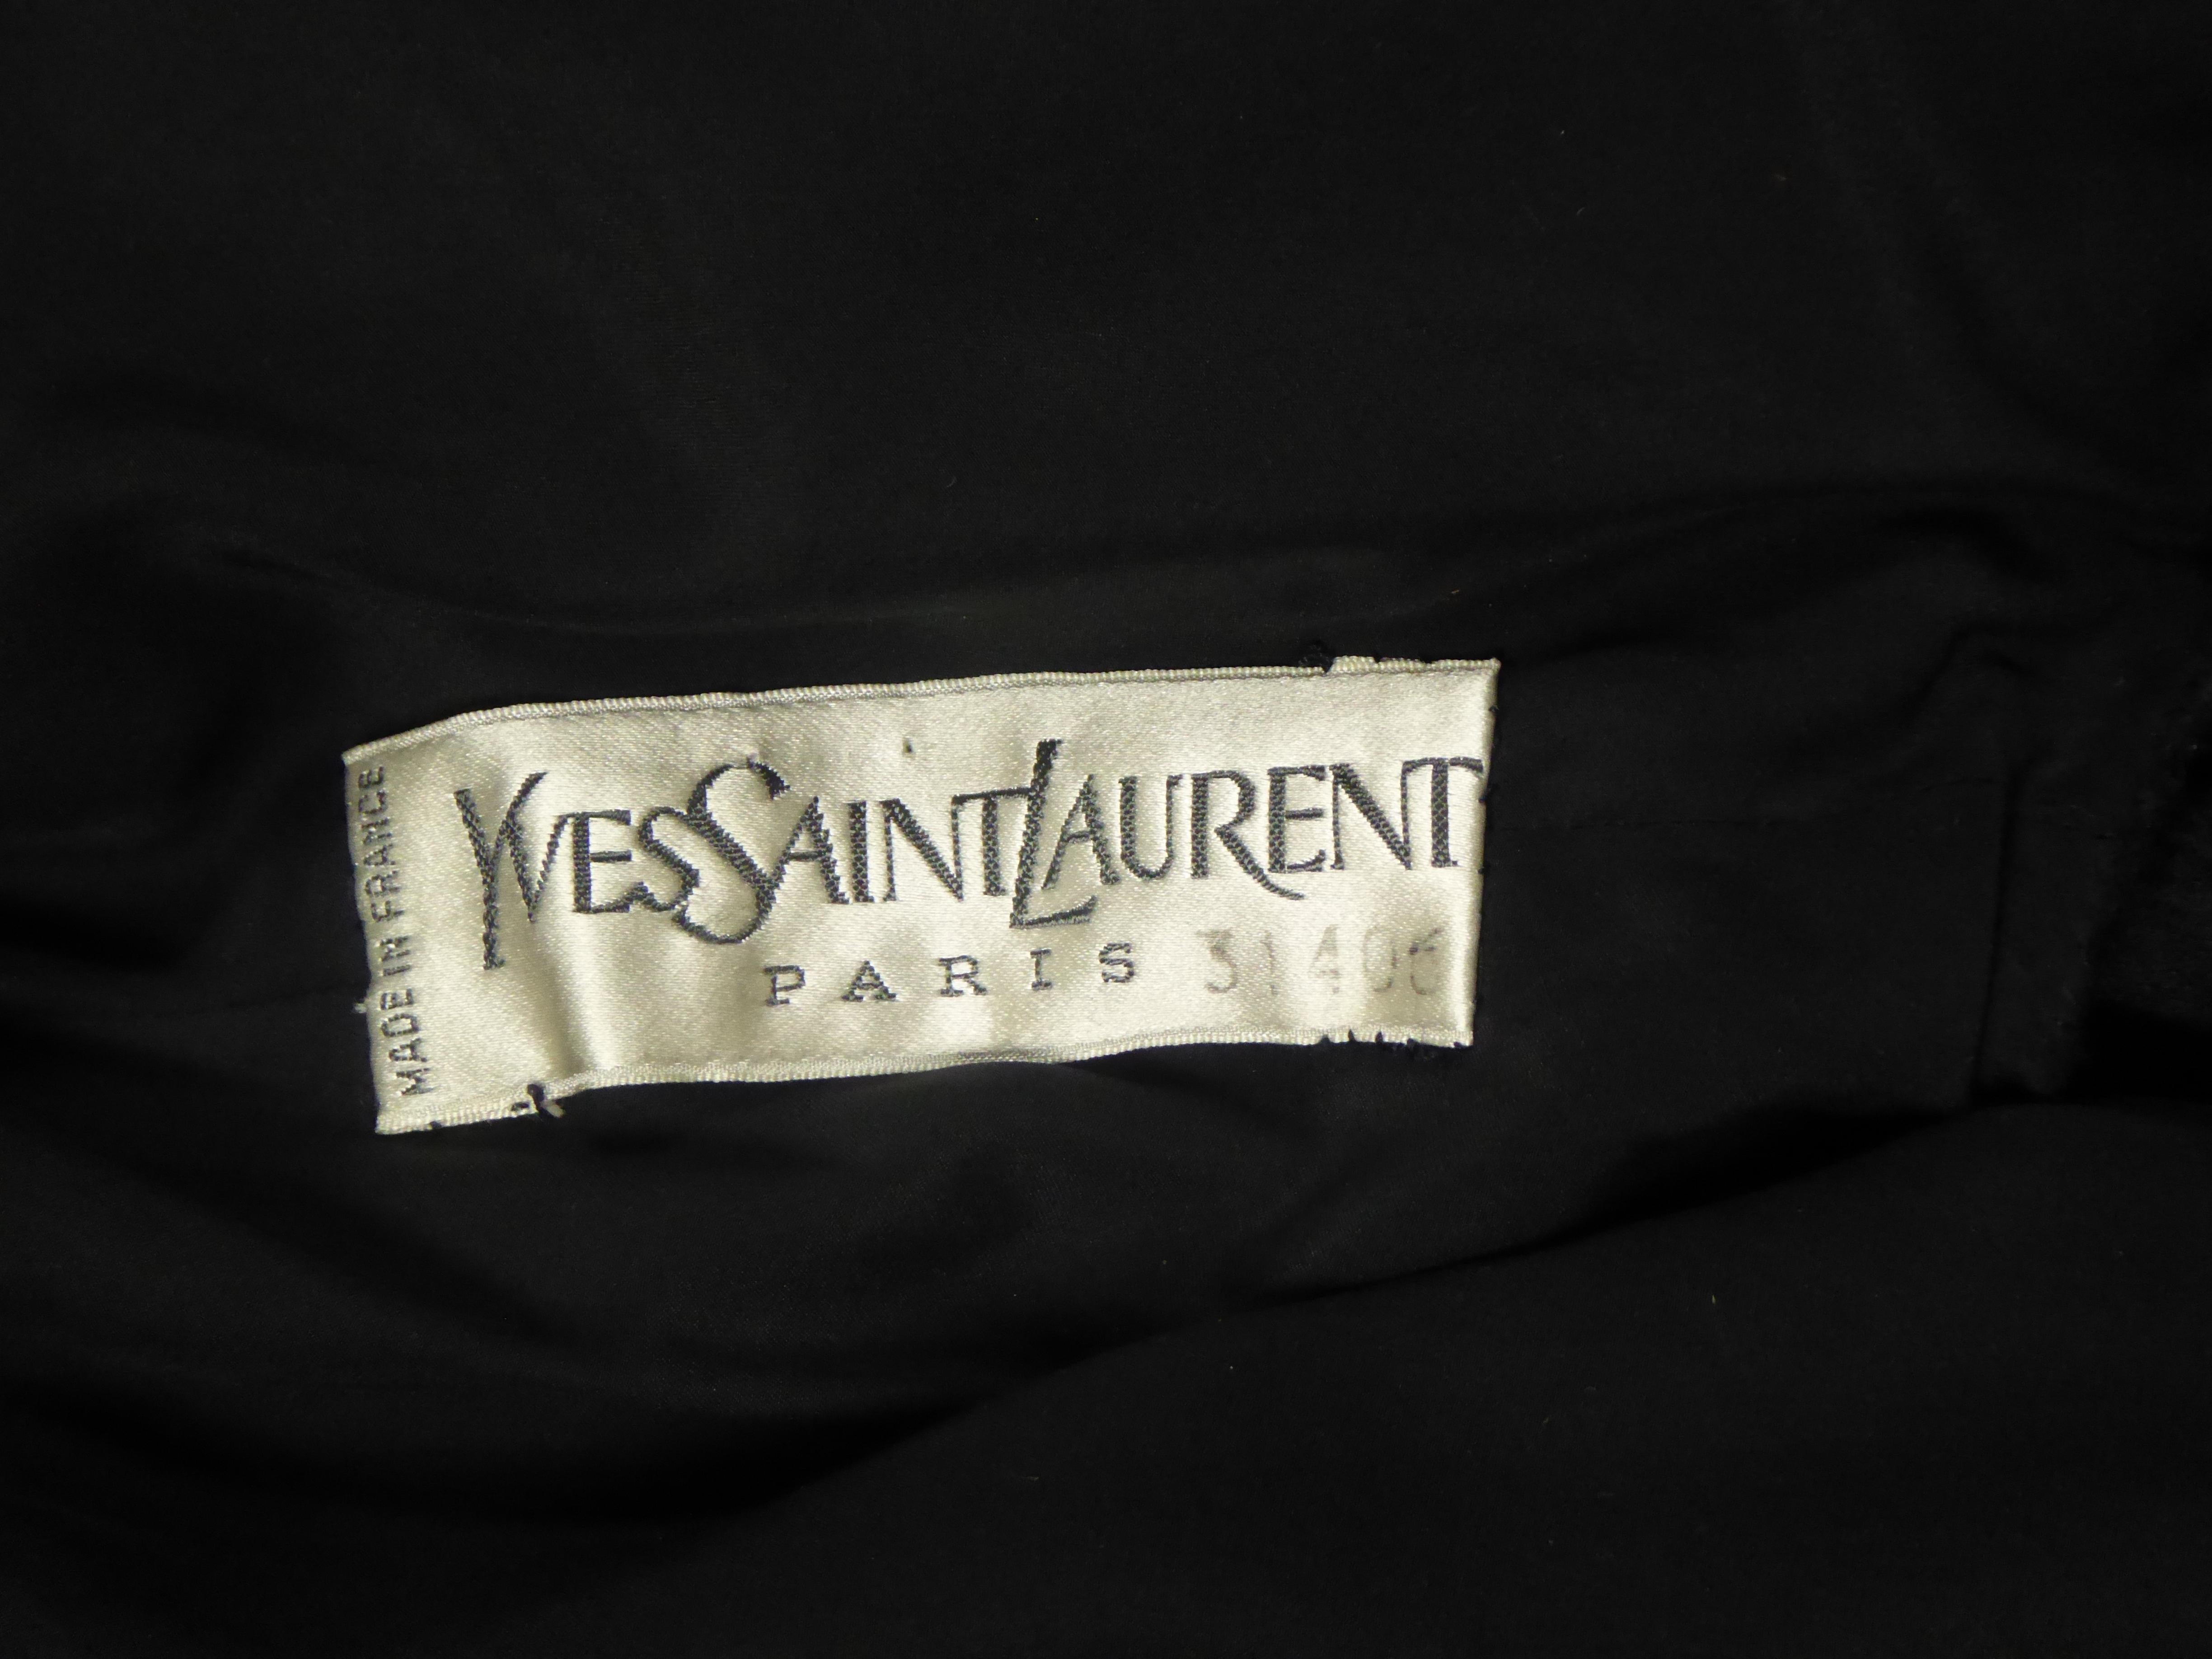 Circa 1973

France

Iconic Yves Saint Laurent Haute Couture little black dress numbered 34406 and dating from the 1970s. Straight cut, slightly flared at the bottom, large oval neckline and long sleeves in slightly stretchy blistered jersey. Cuffs,